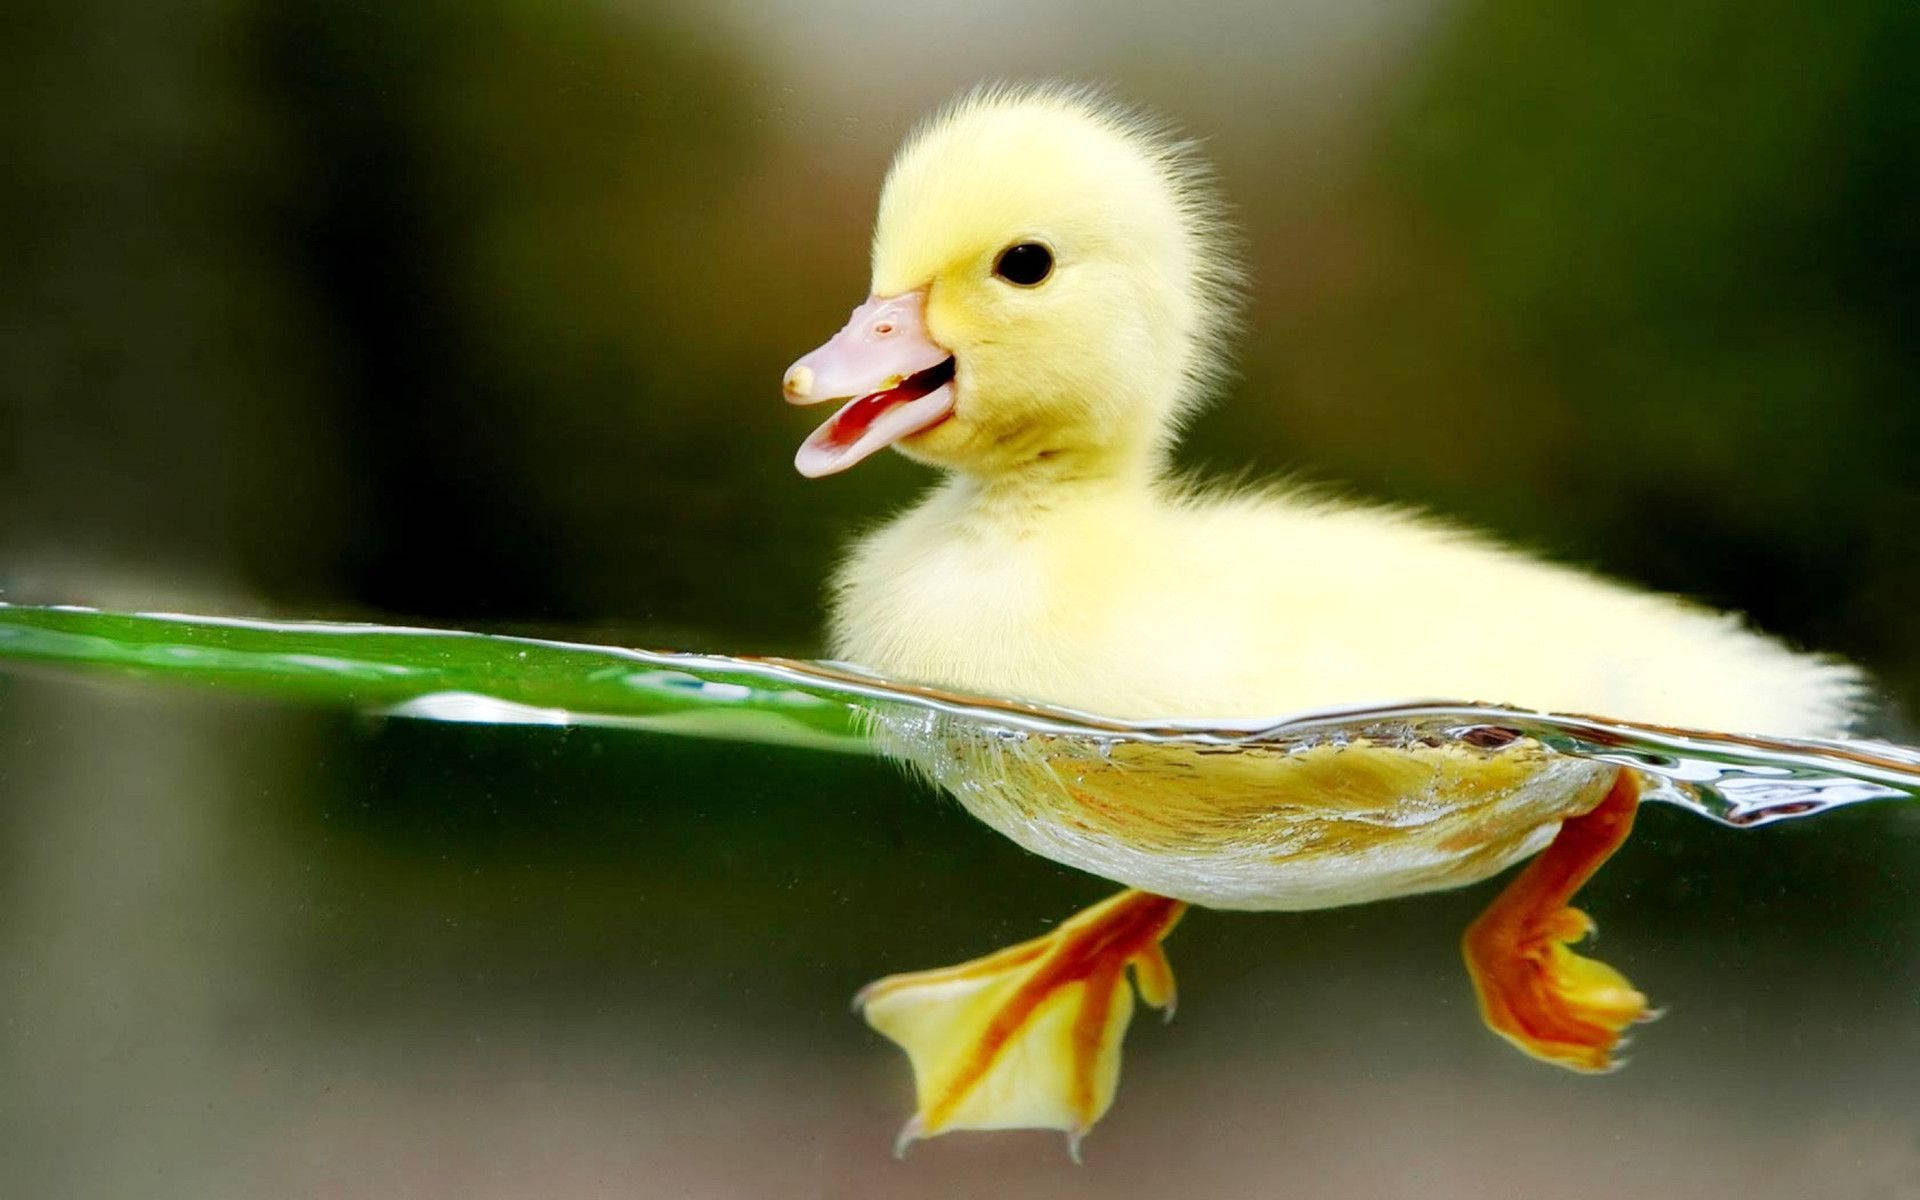 Free Duck Wallpaper Downloads, [200+] Duck Wallpapers for FREE |  